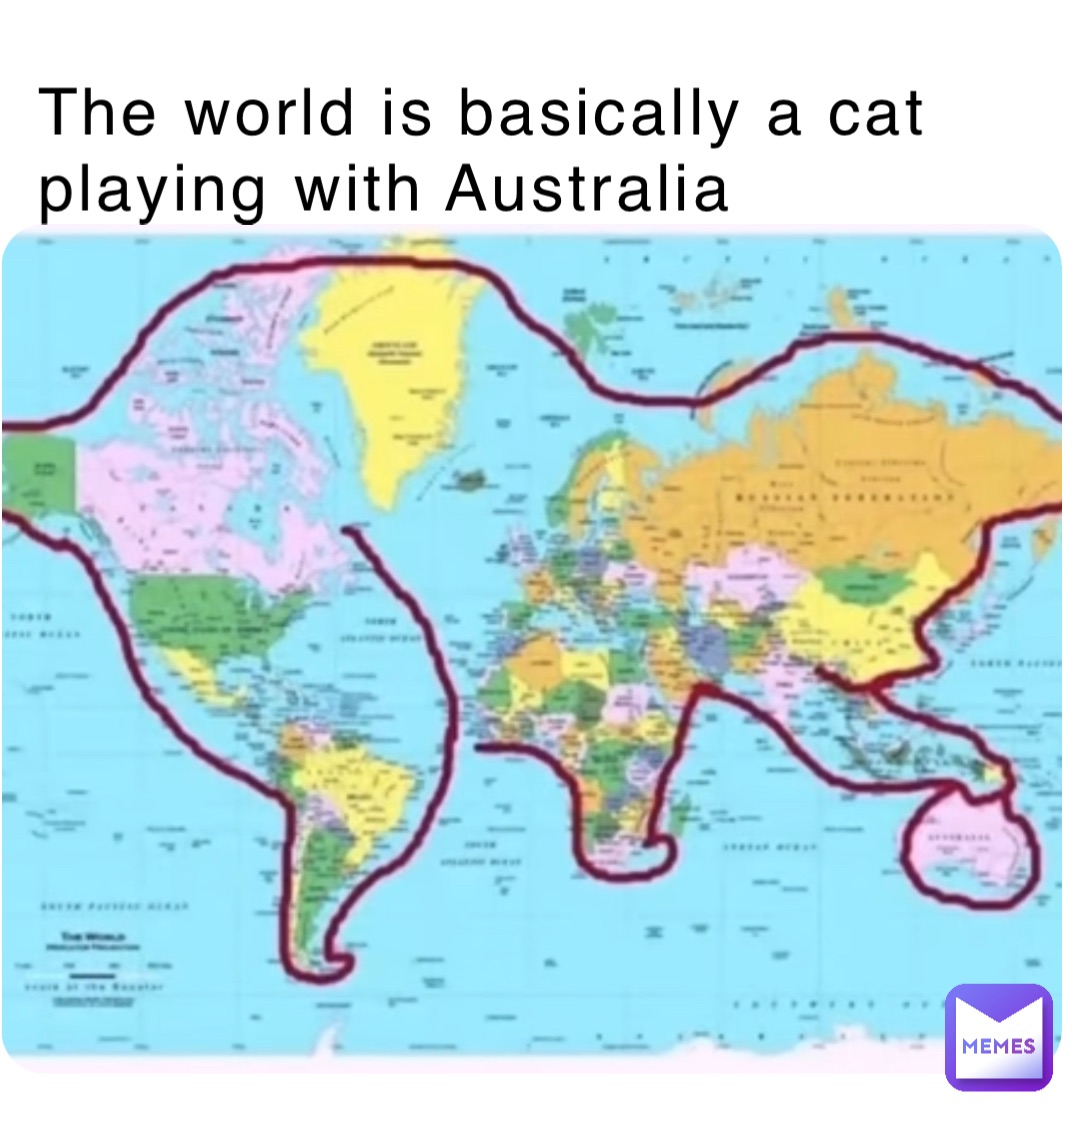 The world is basically a cat playing with Australia